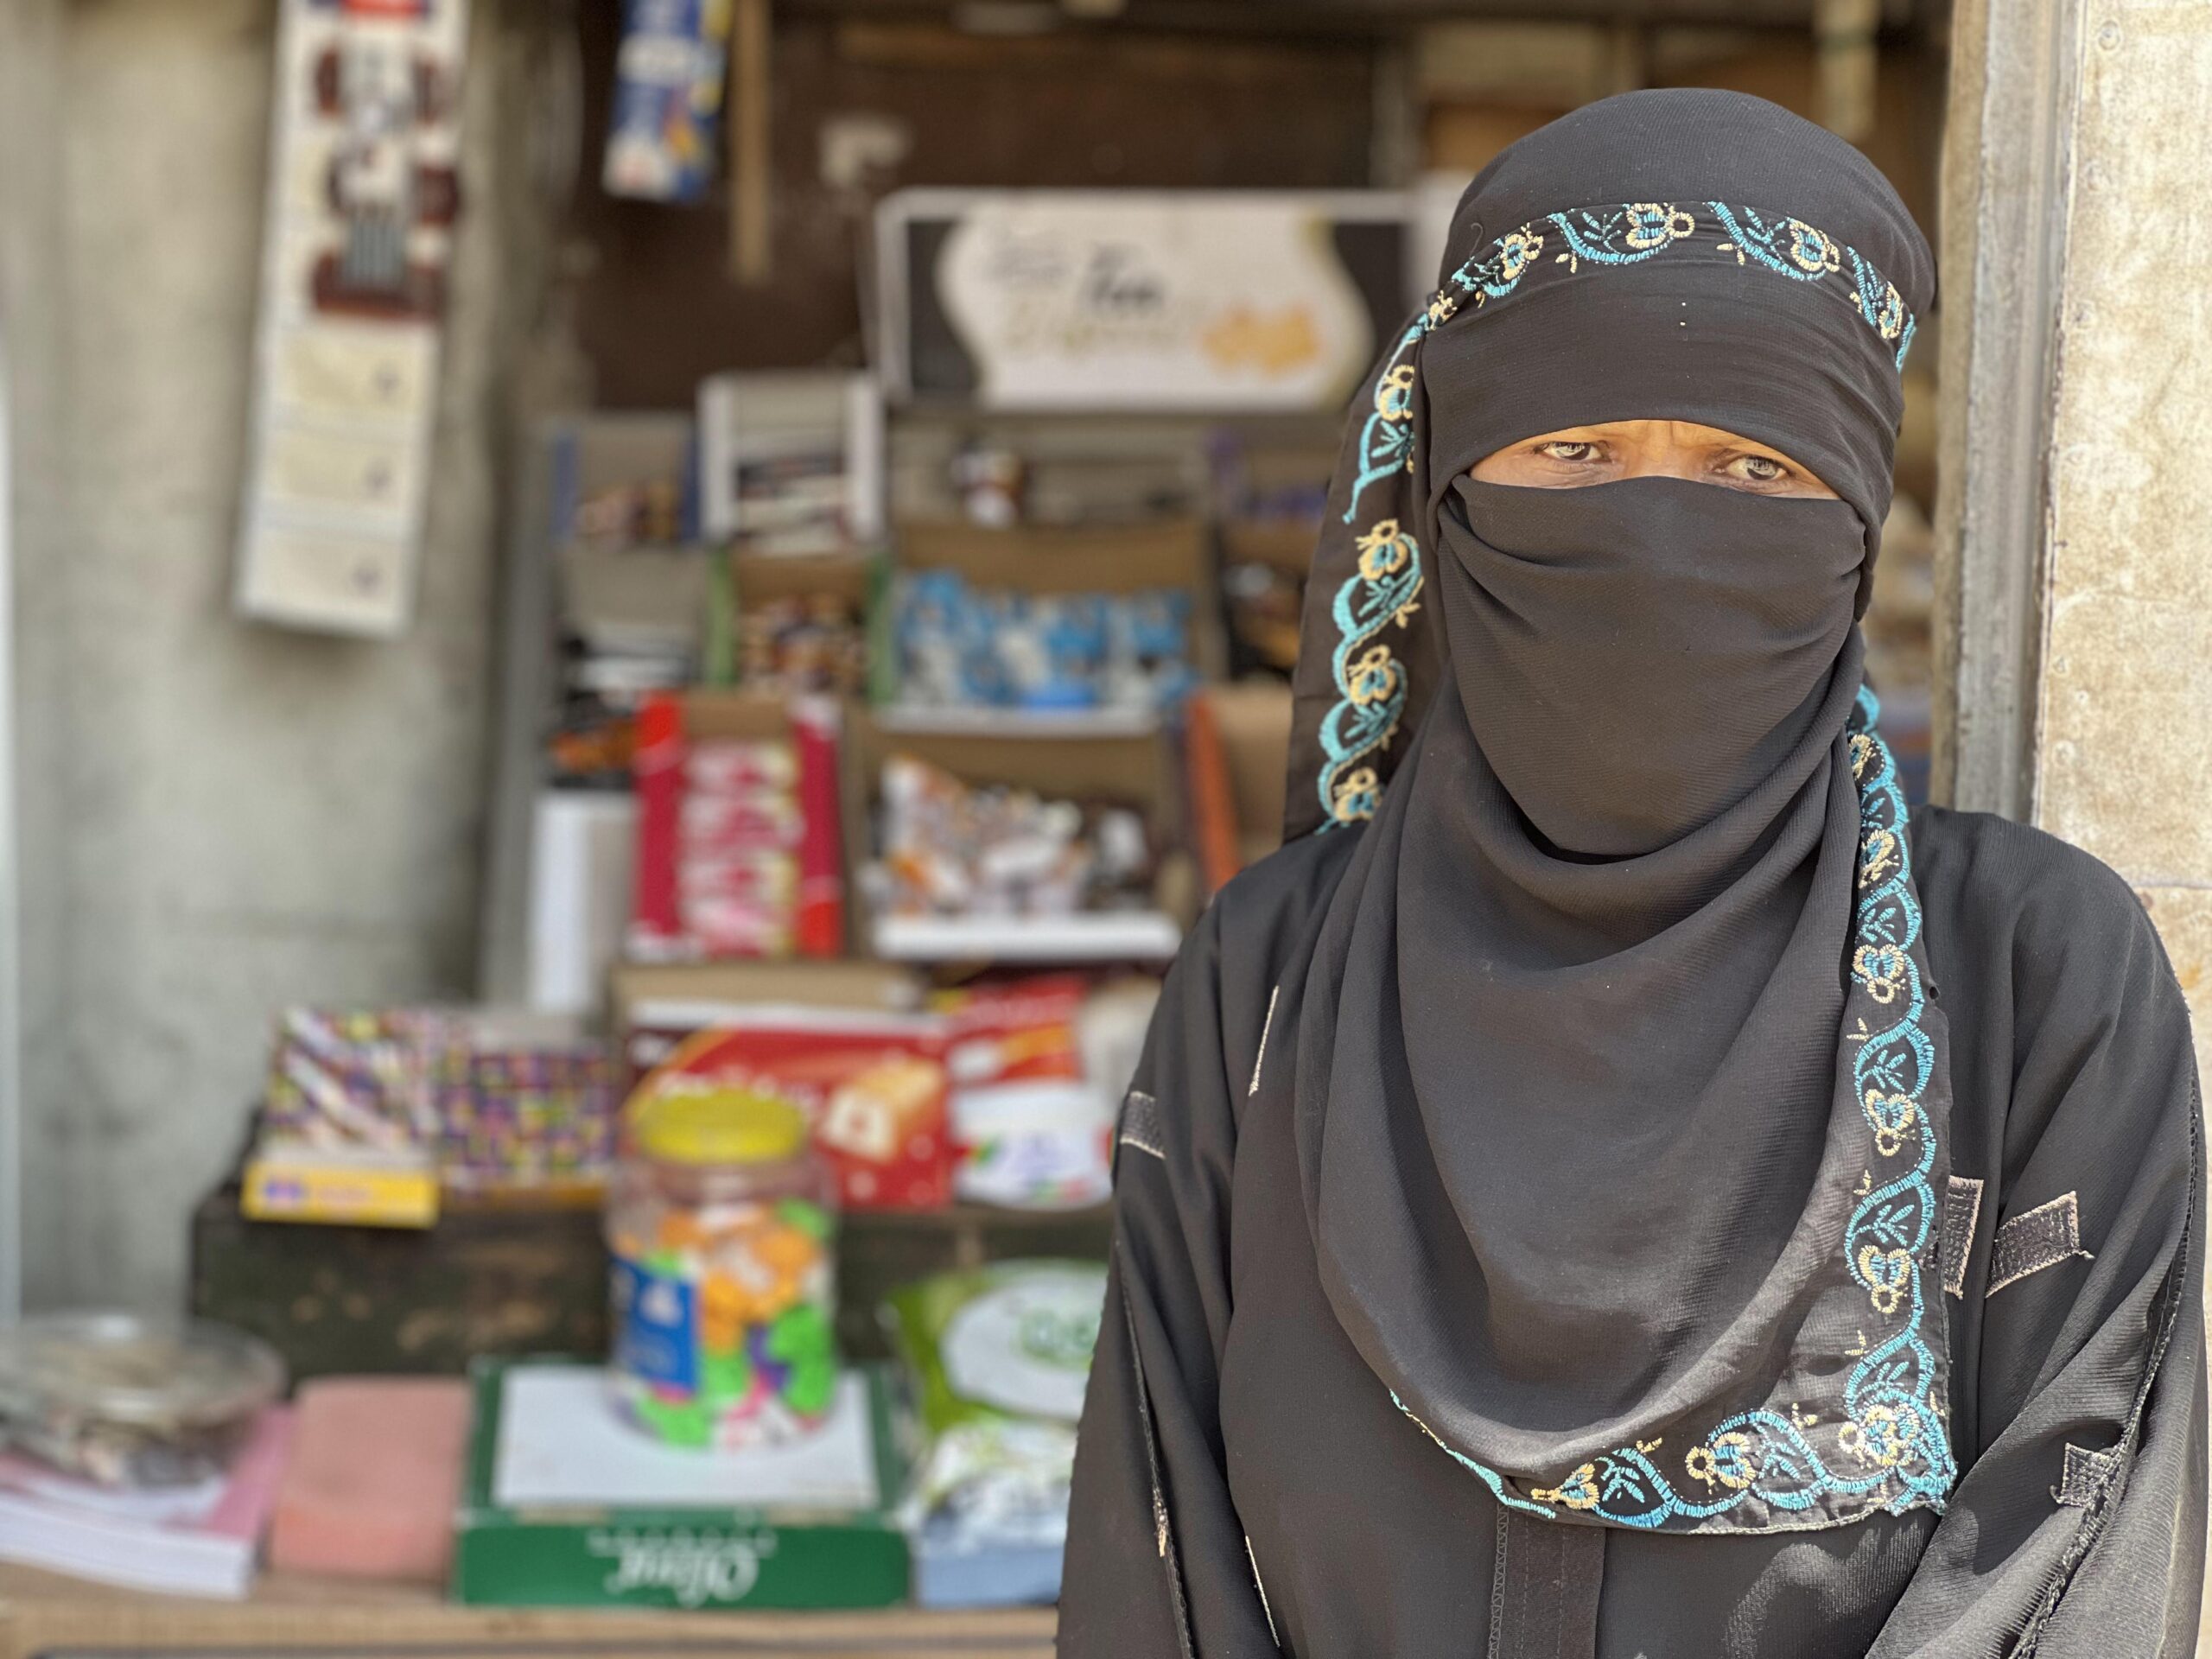 a woman wearing a black head covering